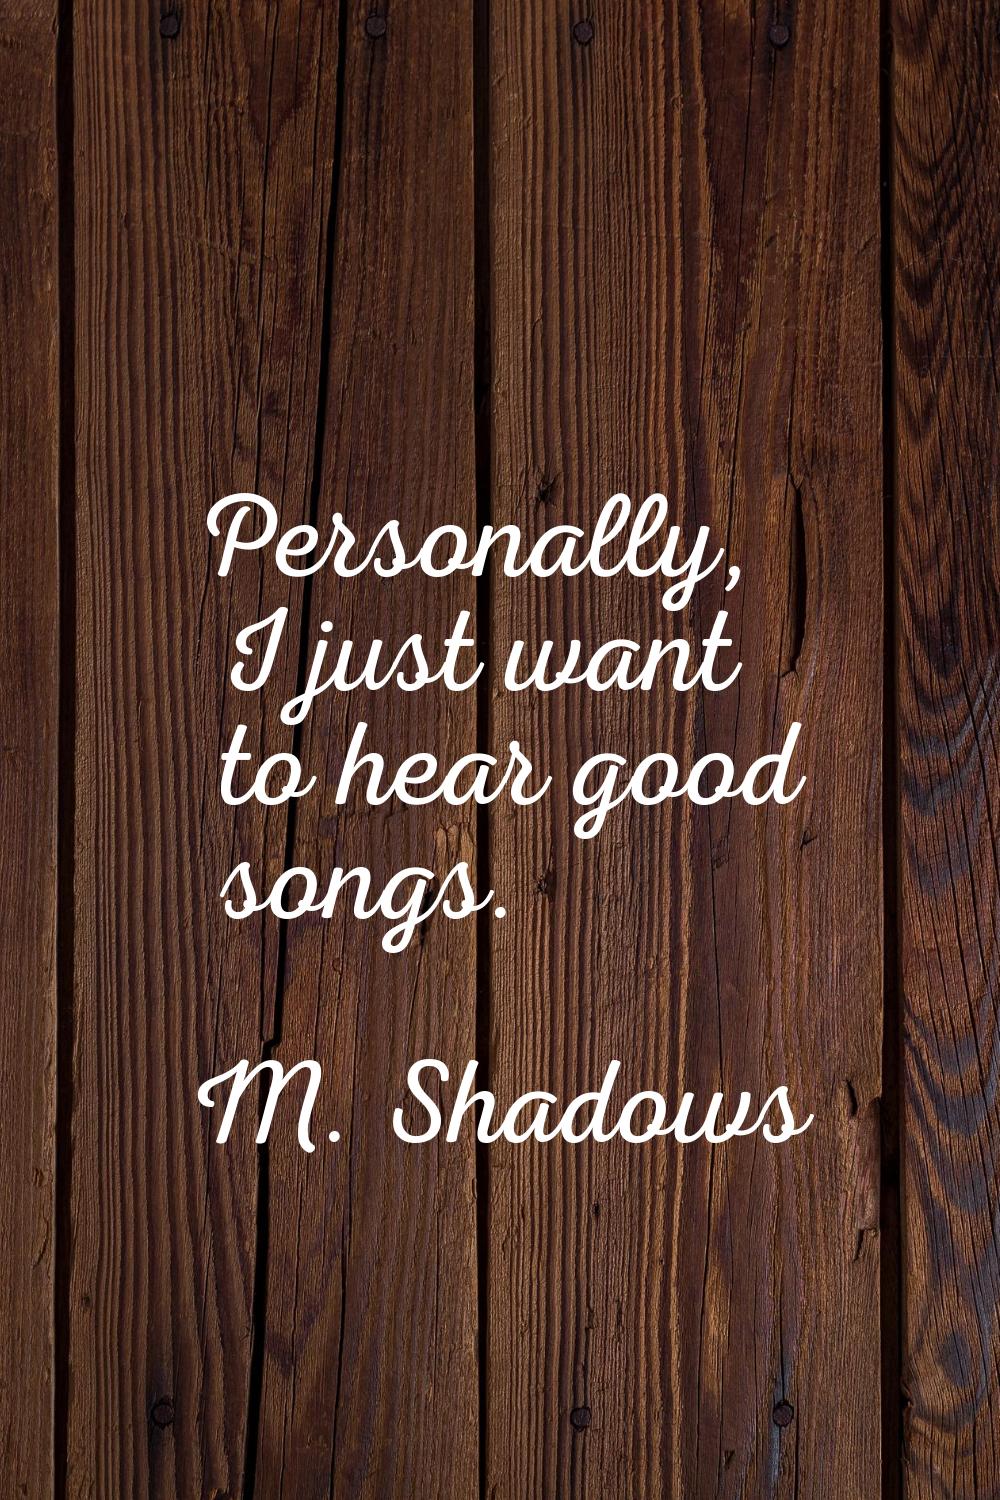 Personally, I just want to hear good songs.